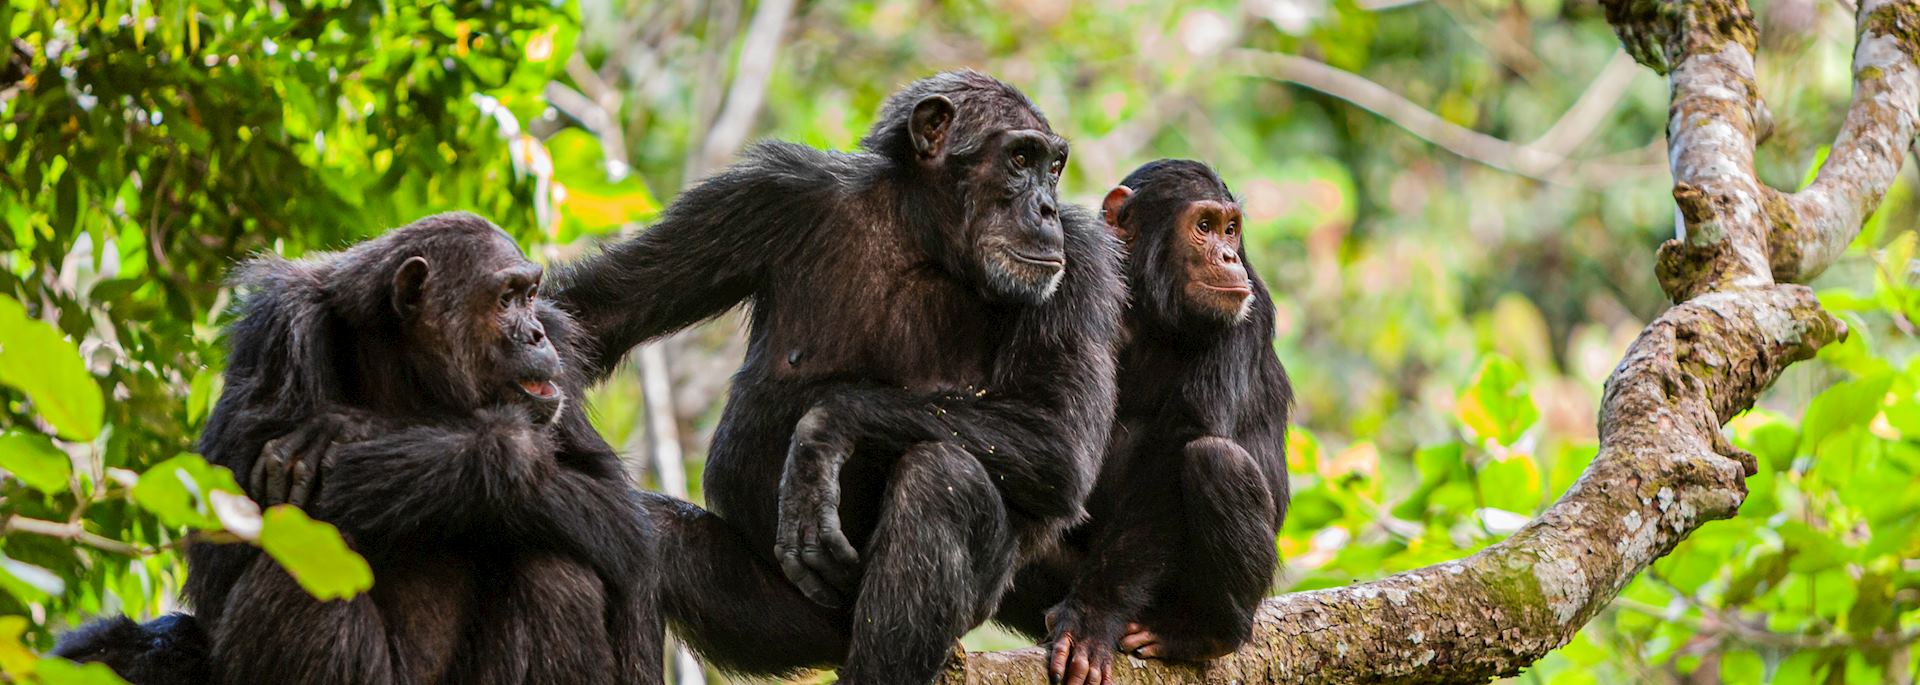 Chimpanzees in the Mahale Mountains National Park